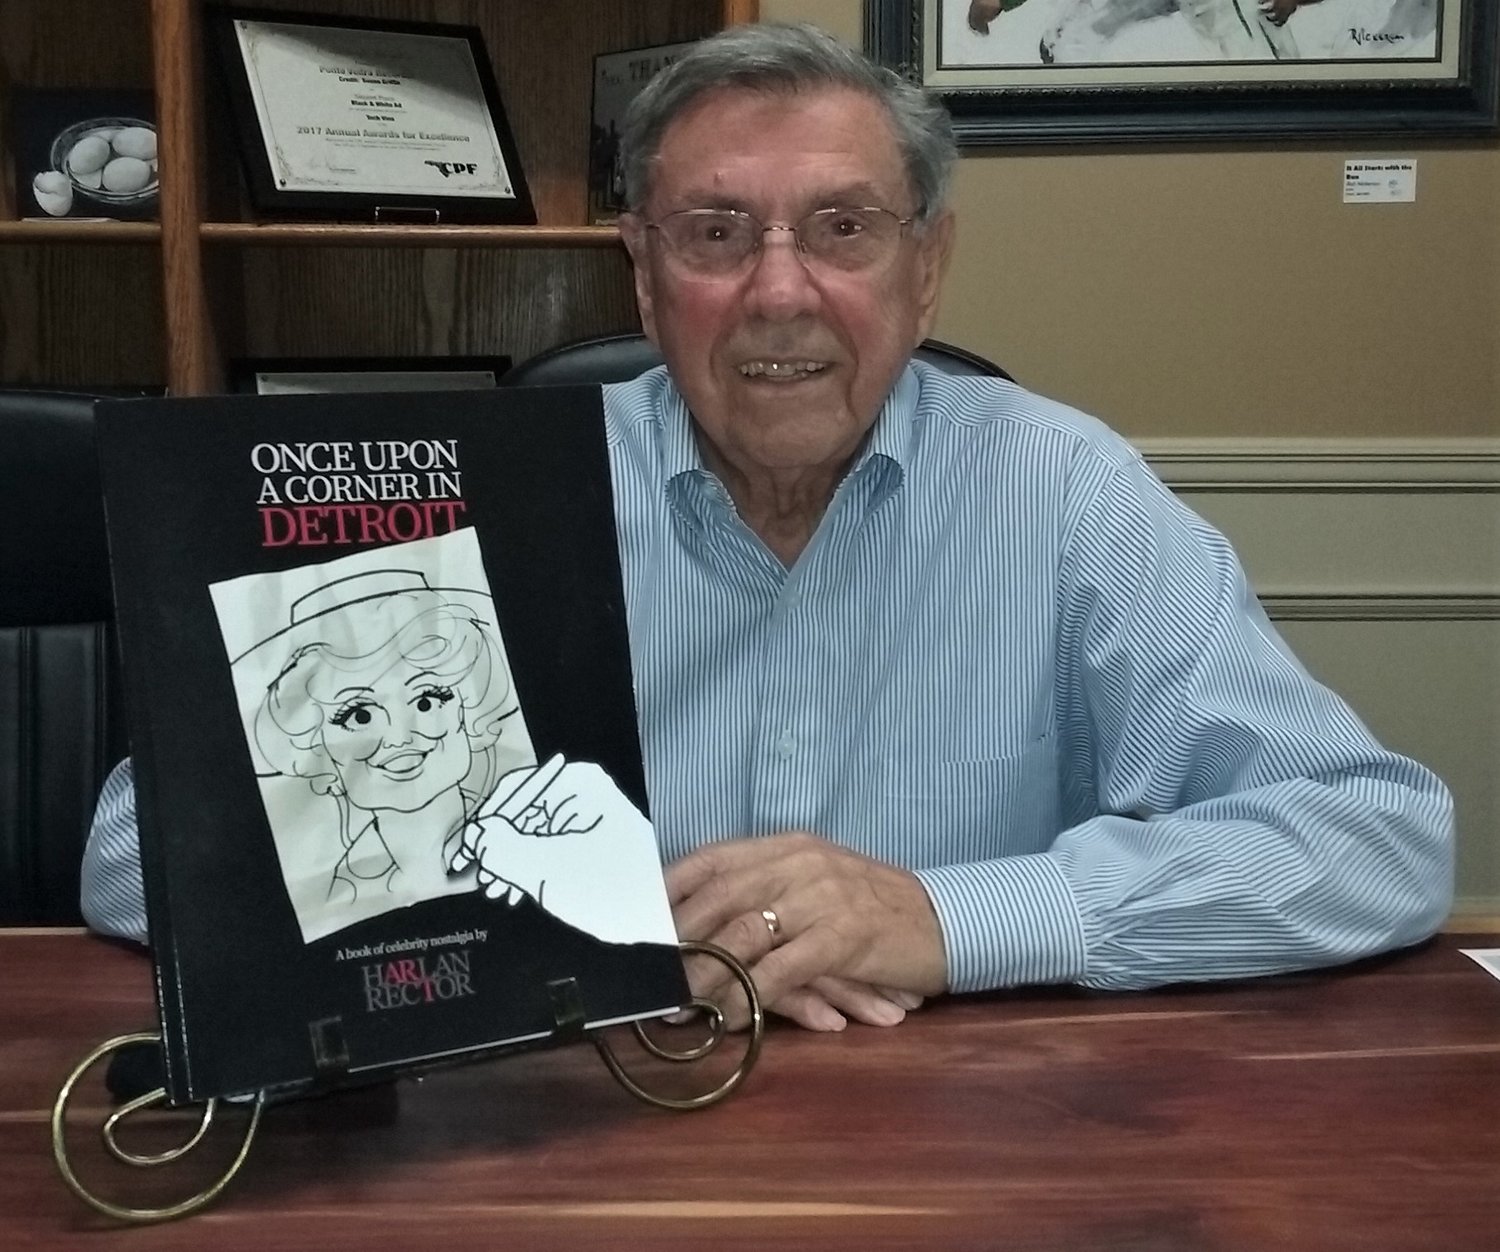 Harlan Rector shows off his book of celebrity caricatures.